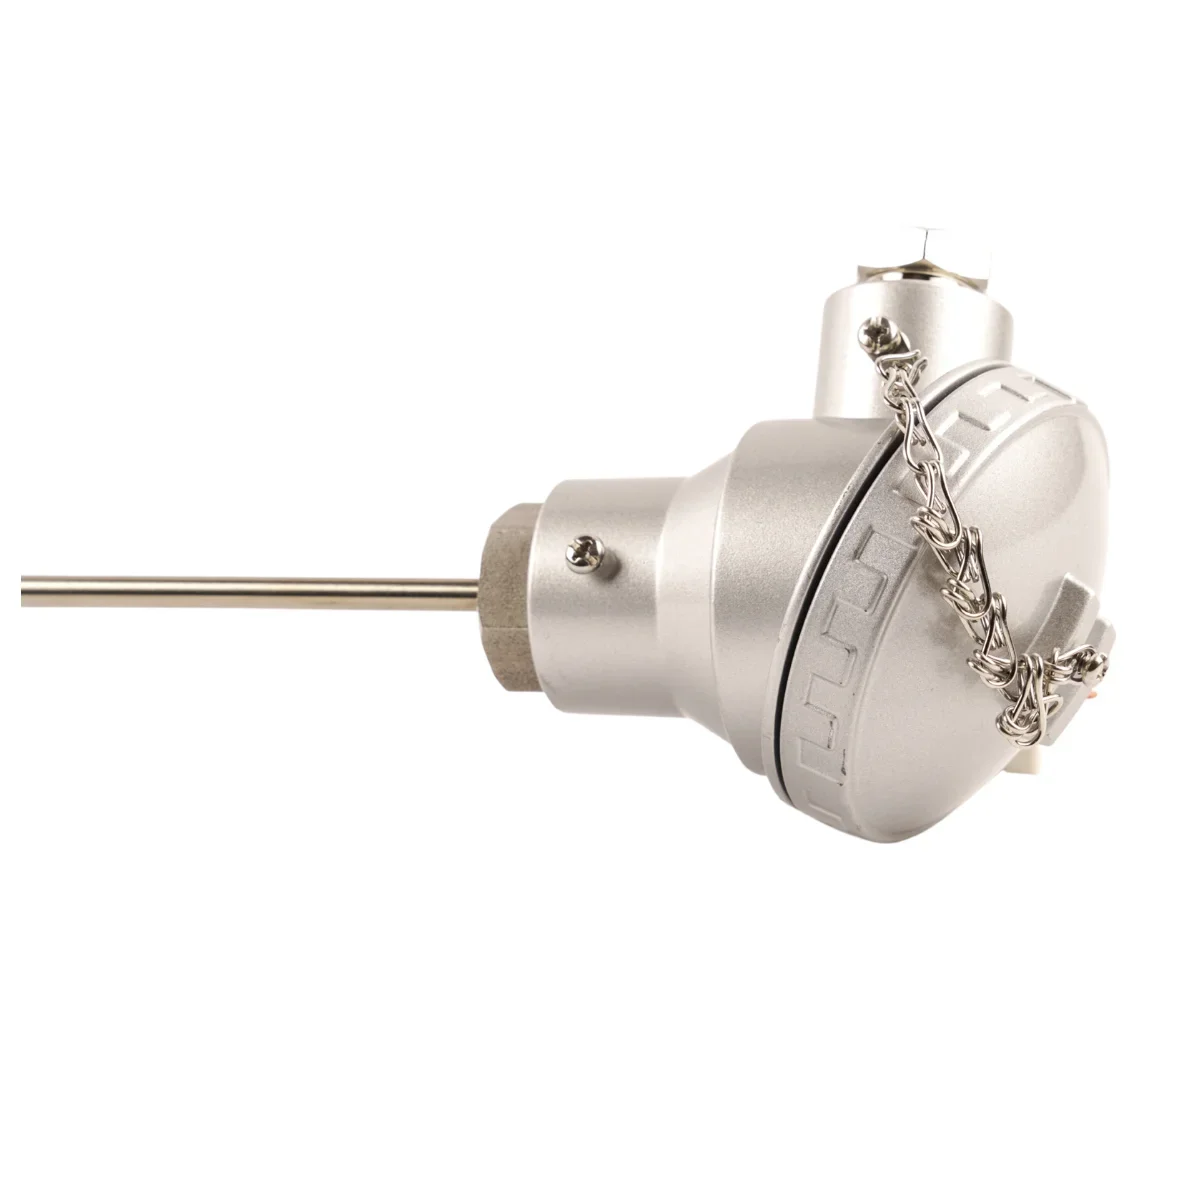 Mineral insulated thermocouple head